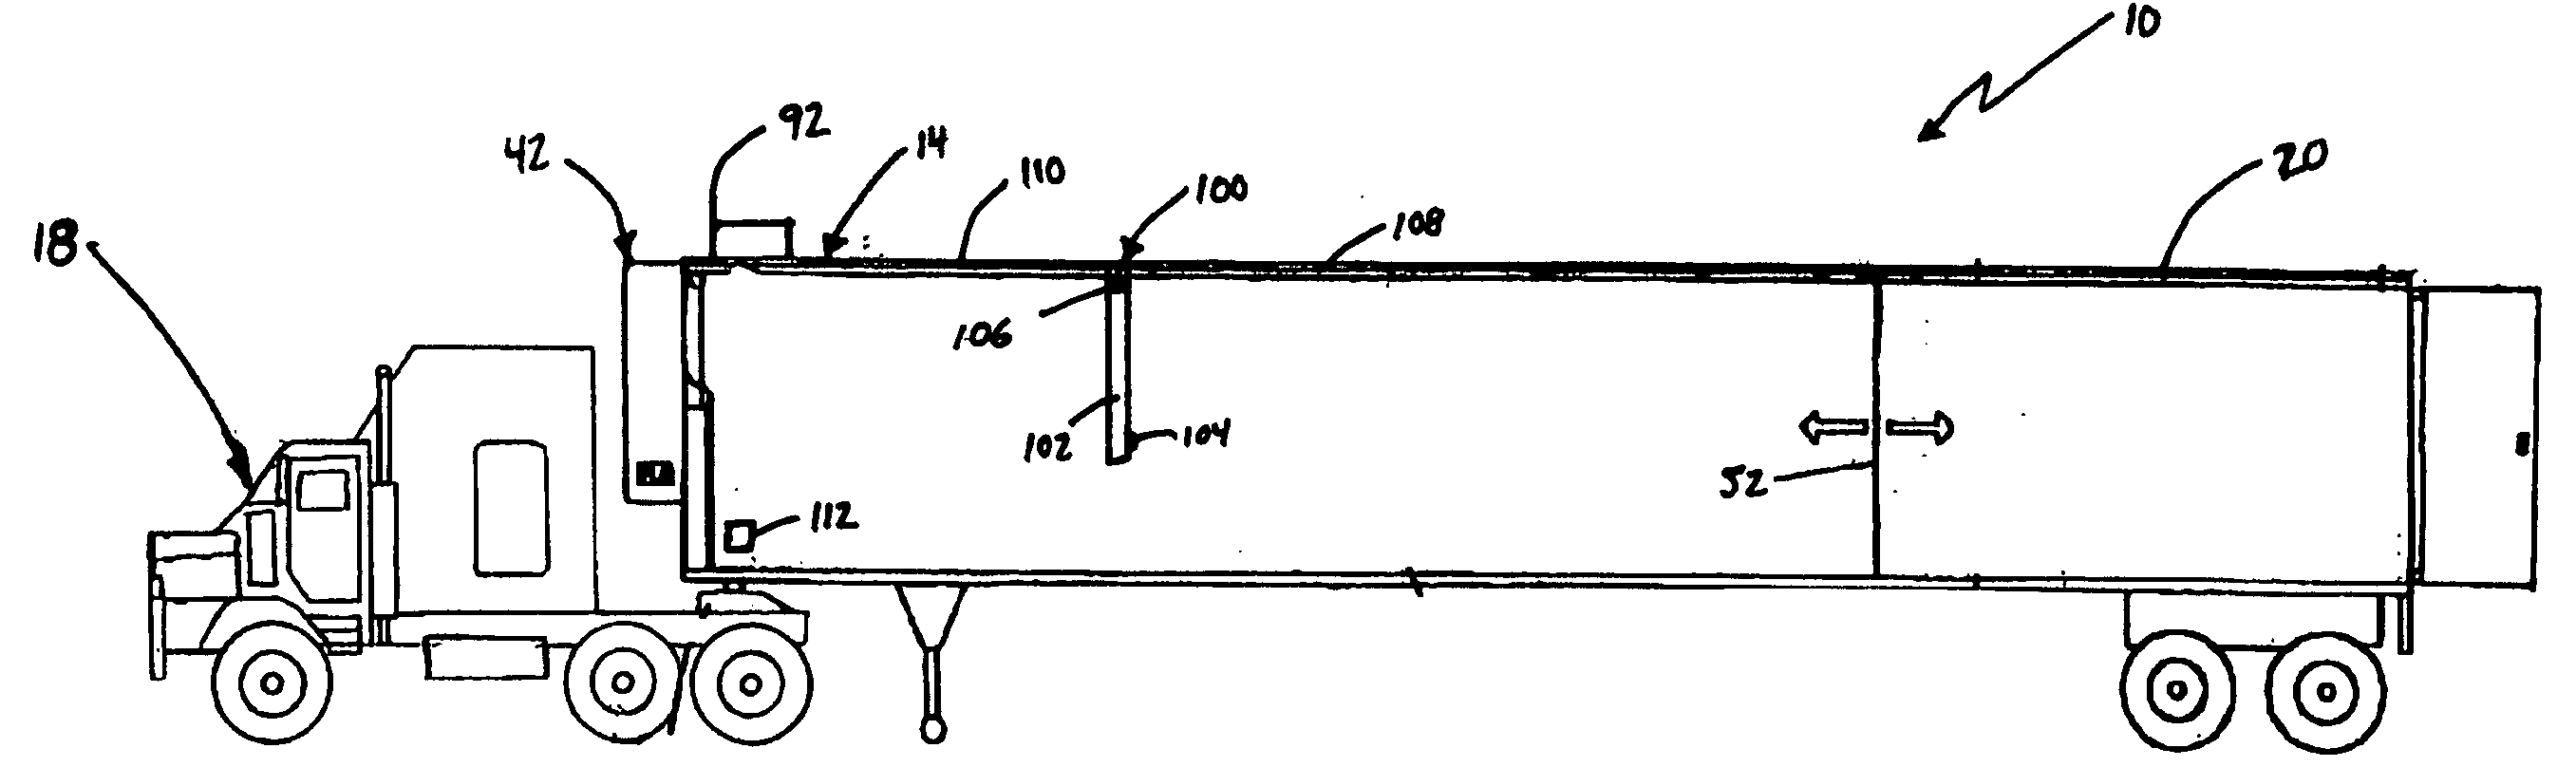 System and method for washing a vehicle